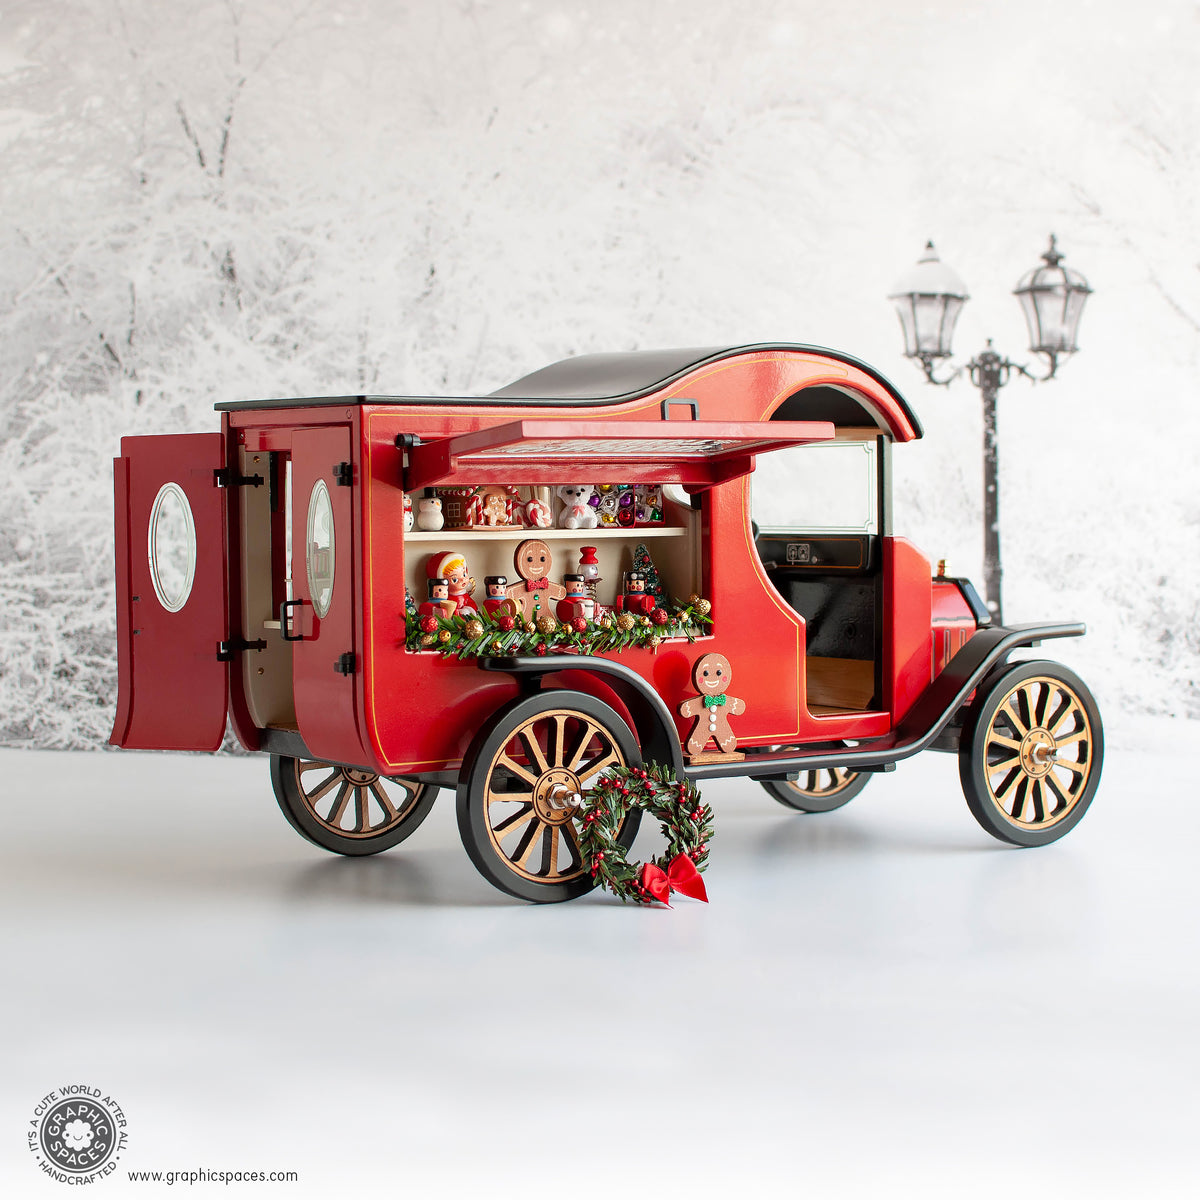 1:12 Scale Room Box Red Christmas Market Truck Model T C Cab. Passenger side view. Open window displaying Christmas wares.